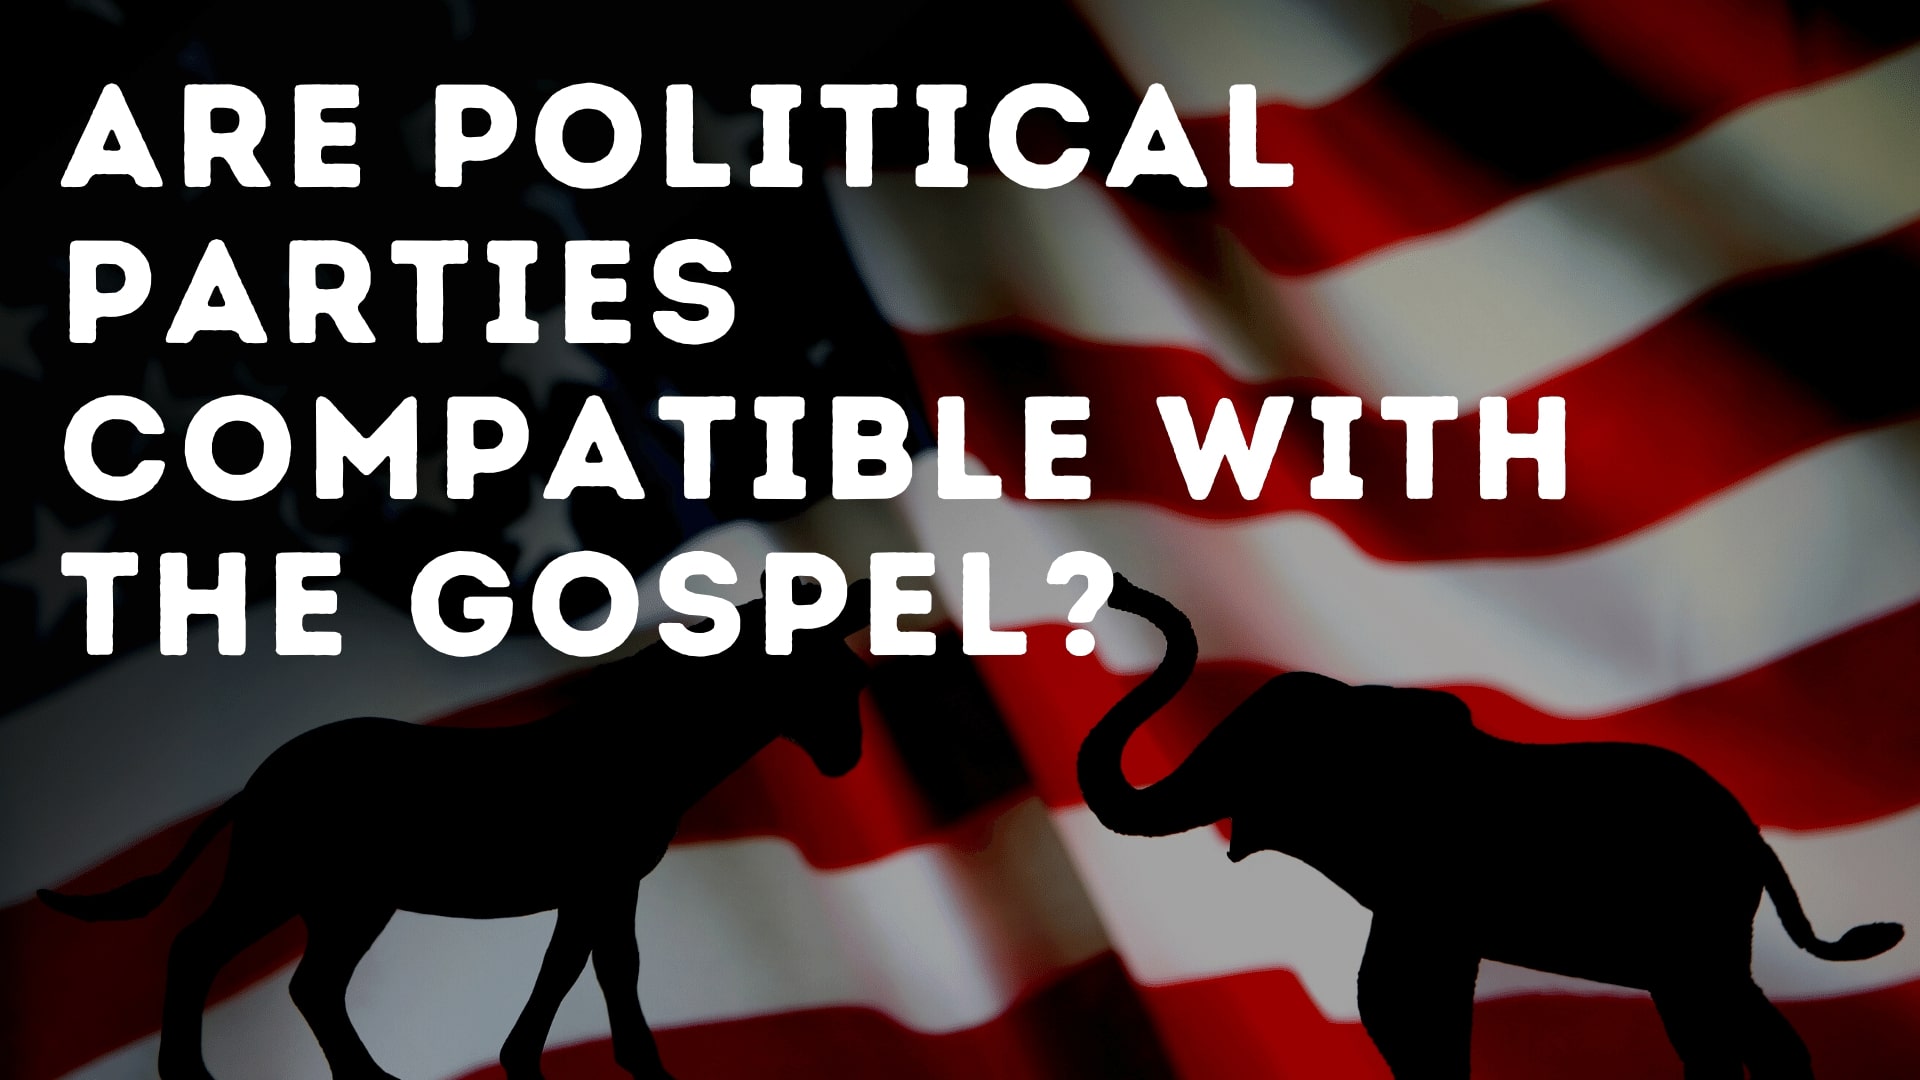 Are political parties compatible with the gospel?